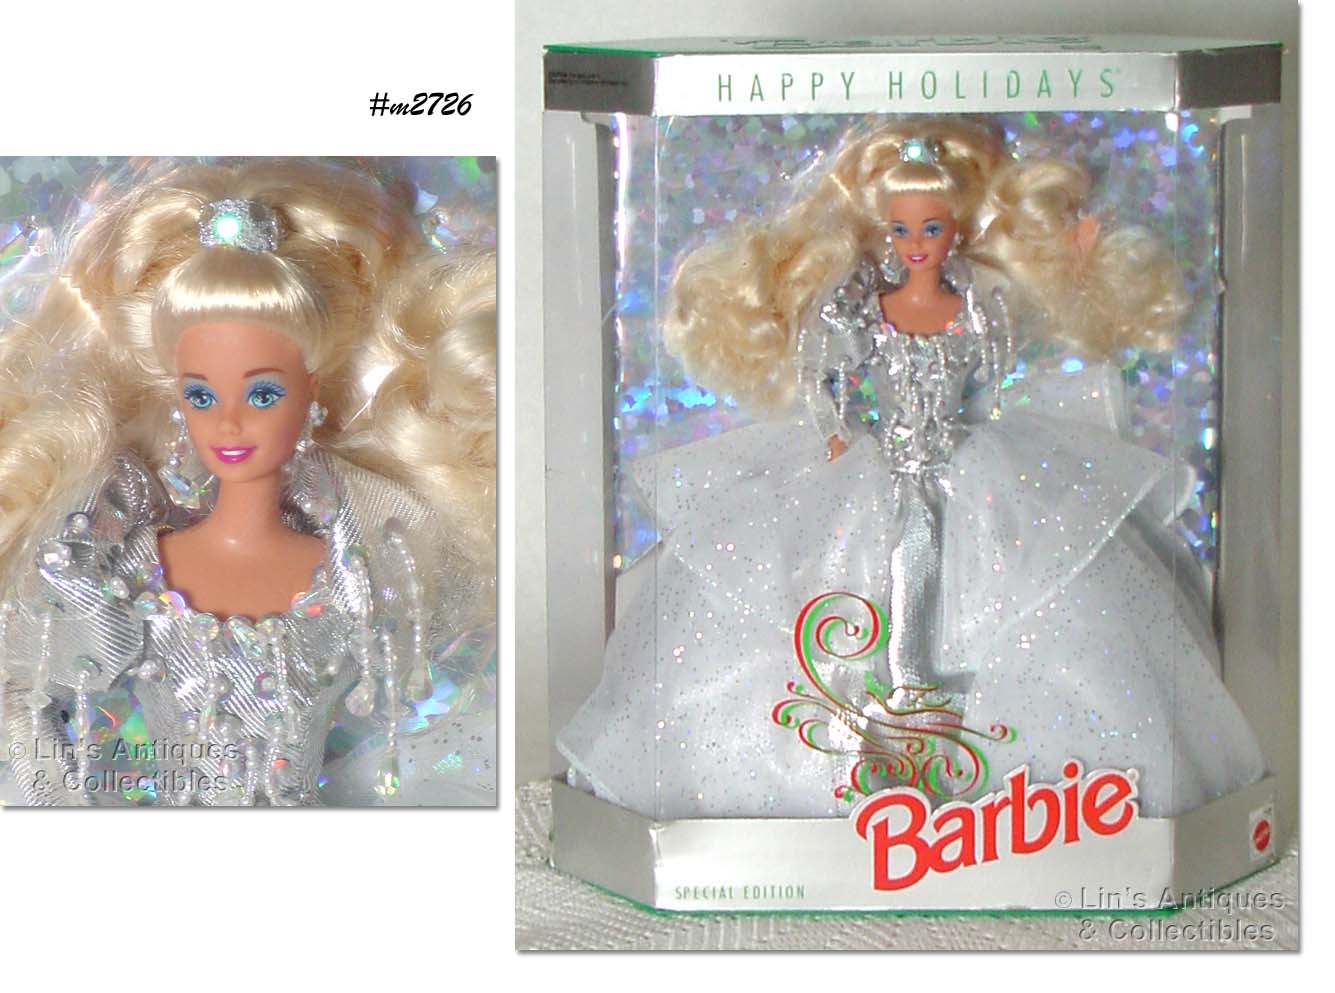 1989 special edition holiday barbie